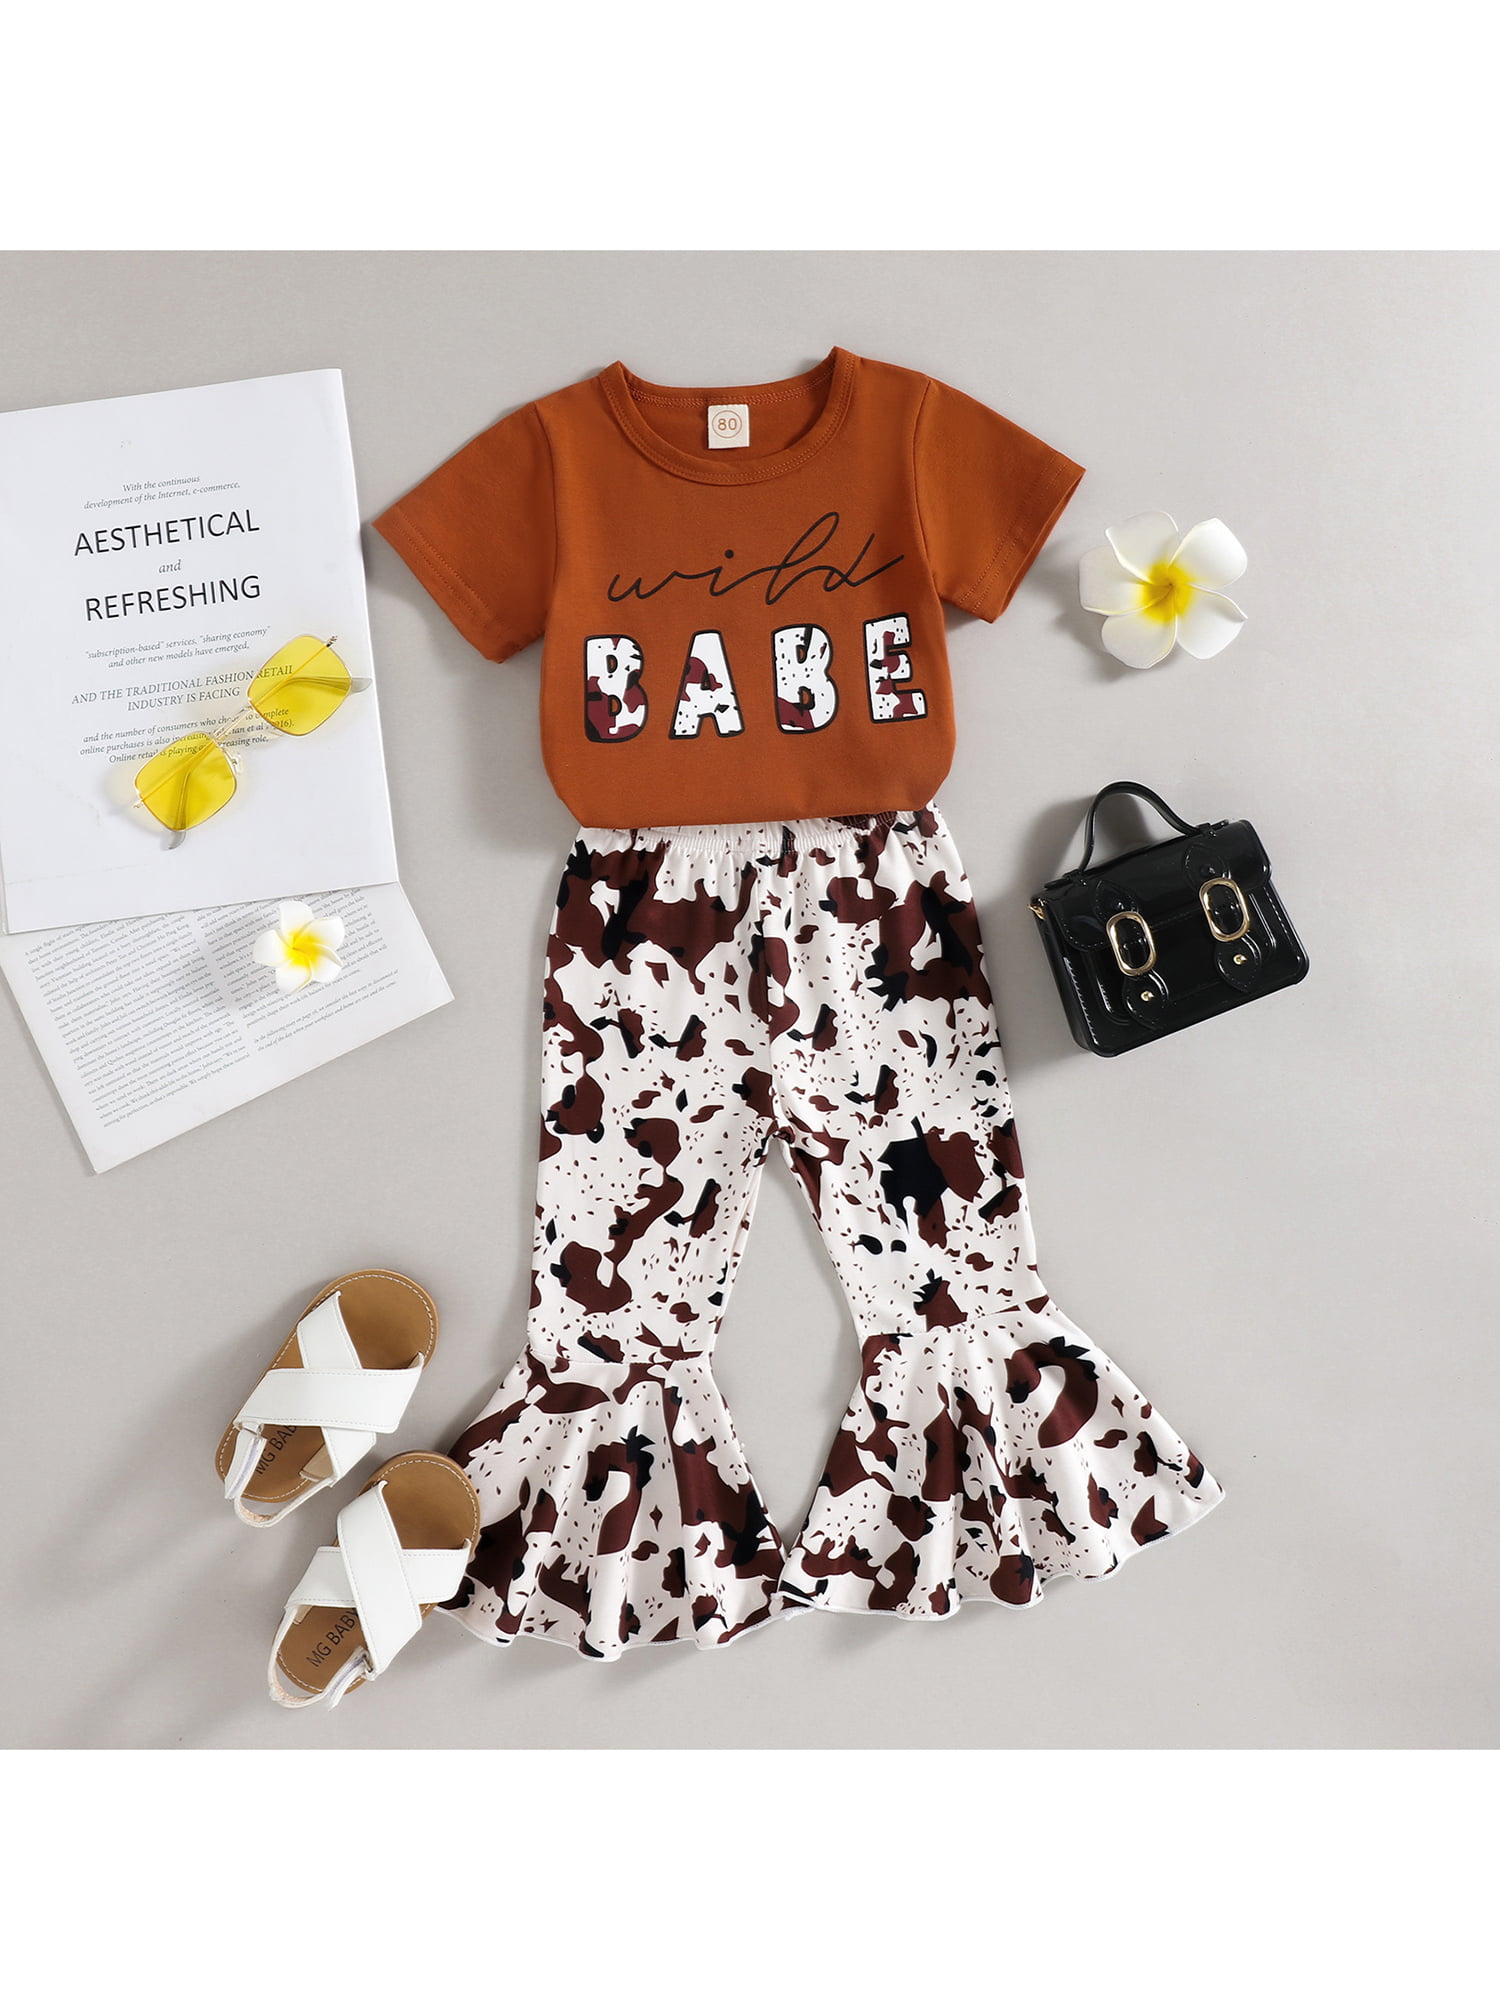 ZHAGHMIN Girls Clothes 8-10 Years Old Toddler Girls Winter Long Sleeve  Monogrammed Tops Brown Cow Print Bell Bottoms 2Pcs Set Outfits Sweatpants Teens  Girls Cute Fall Outfits For Teen Girls Staff Fo 